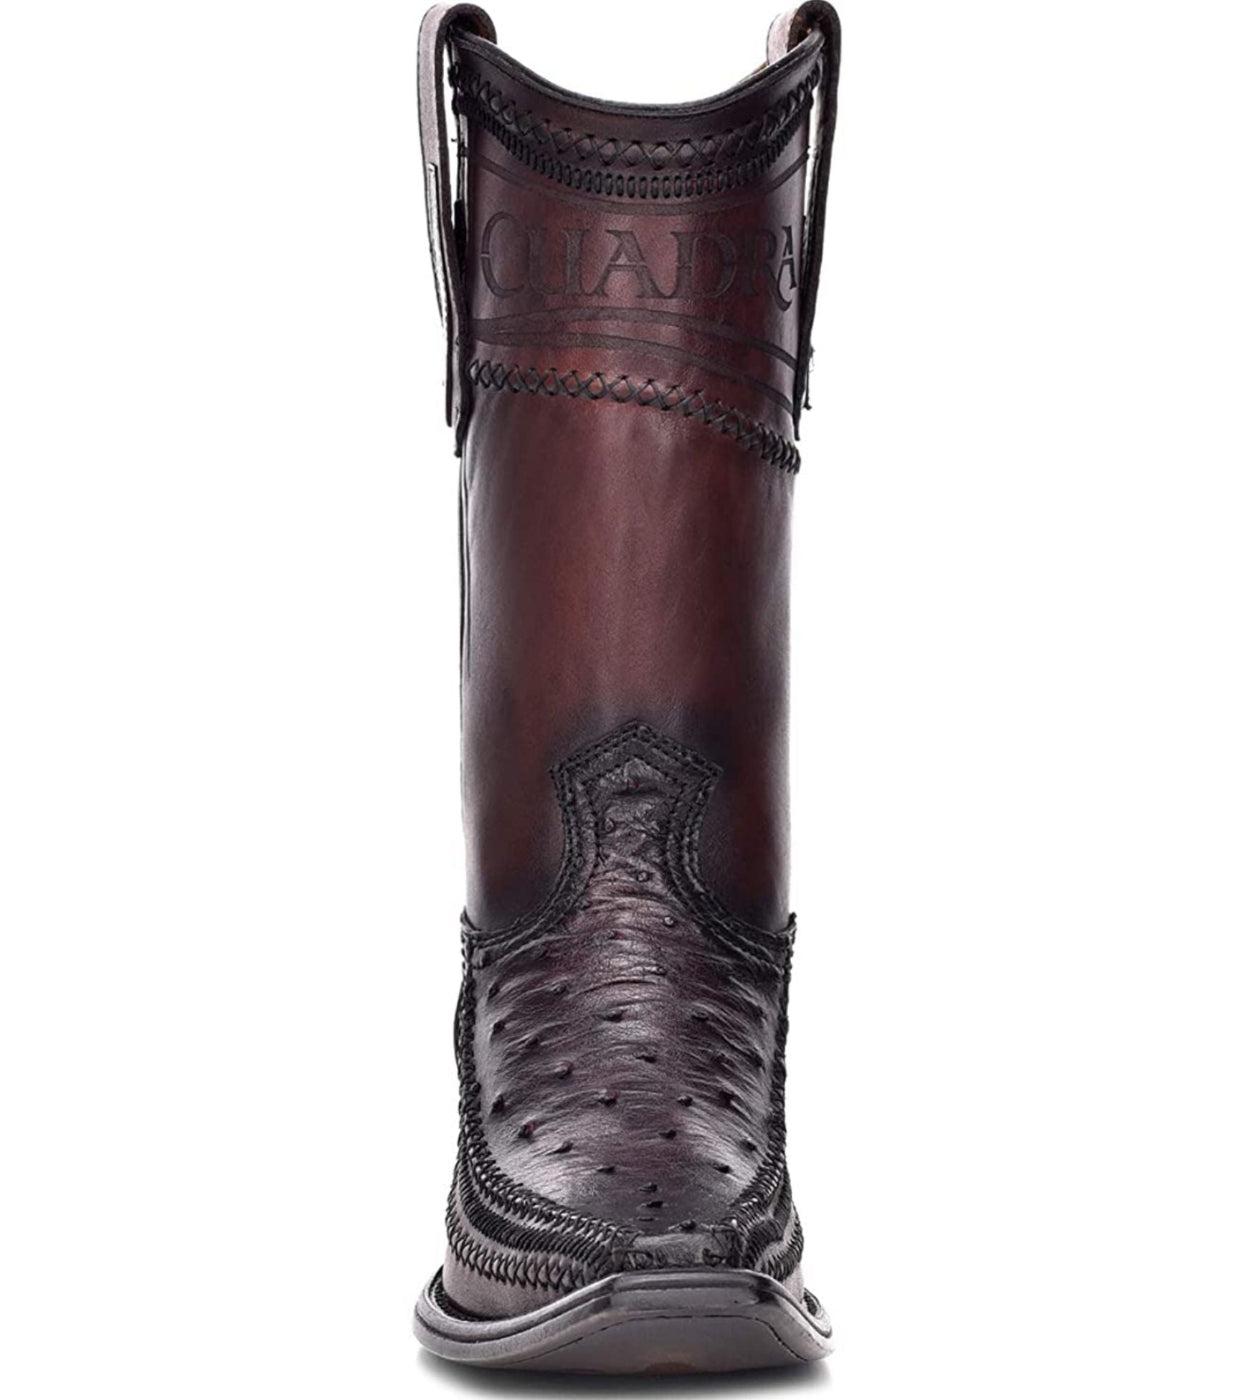 1B1AA1 - Cuadra blackcherry casual cowboy ostrich leather boots for men-Kuet.us